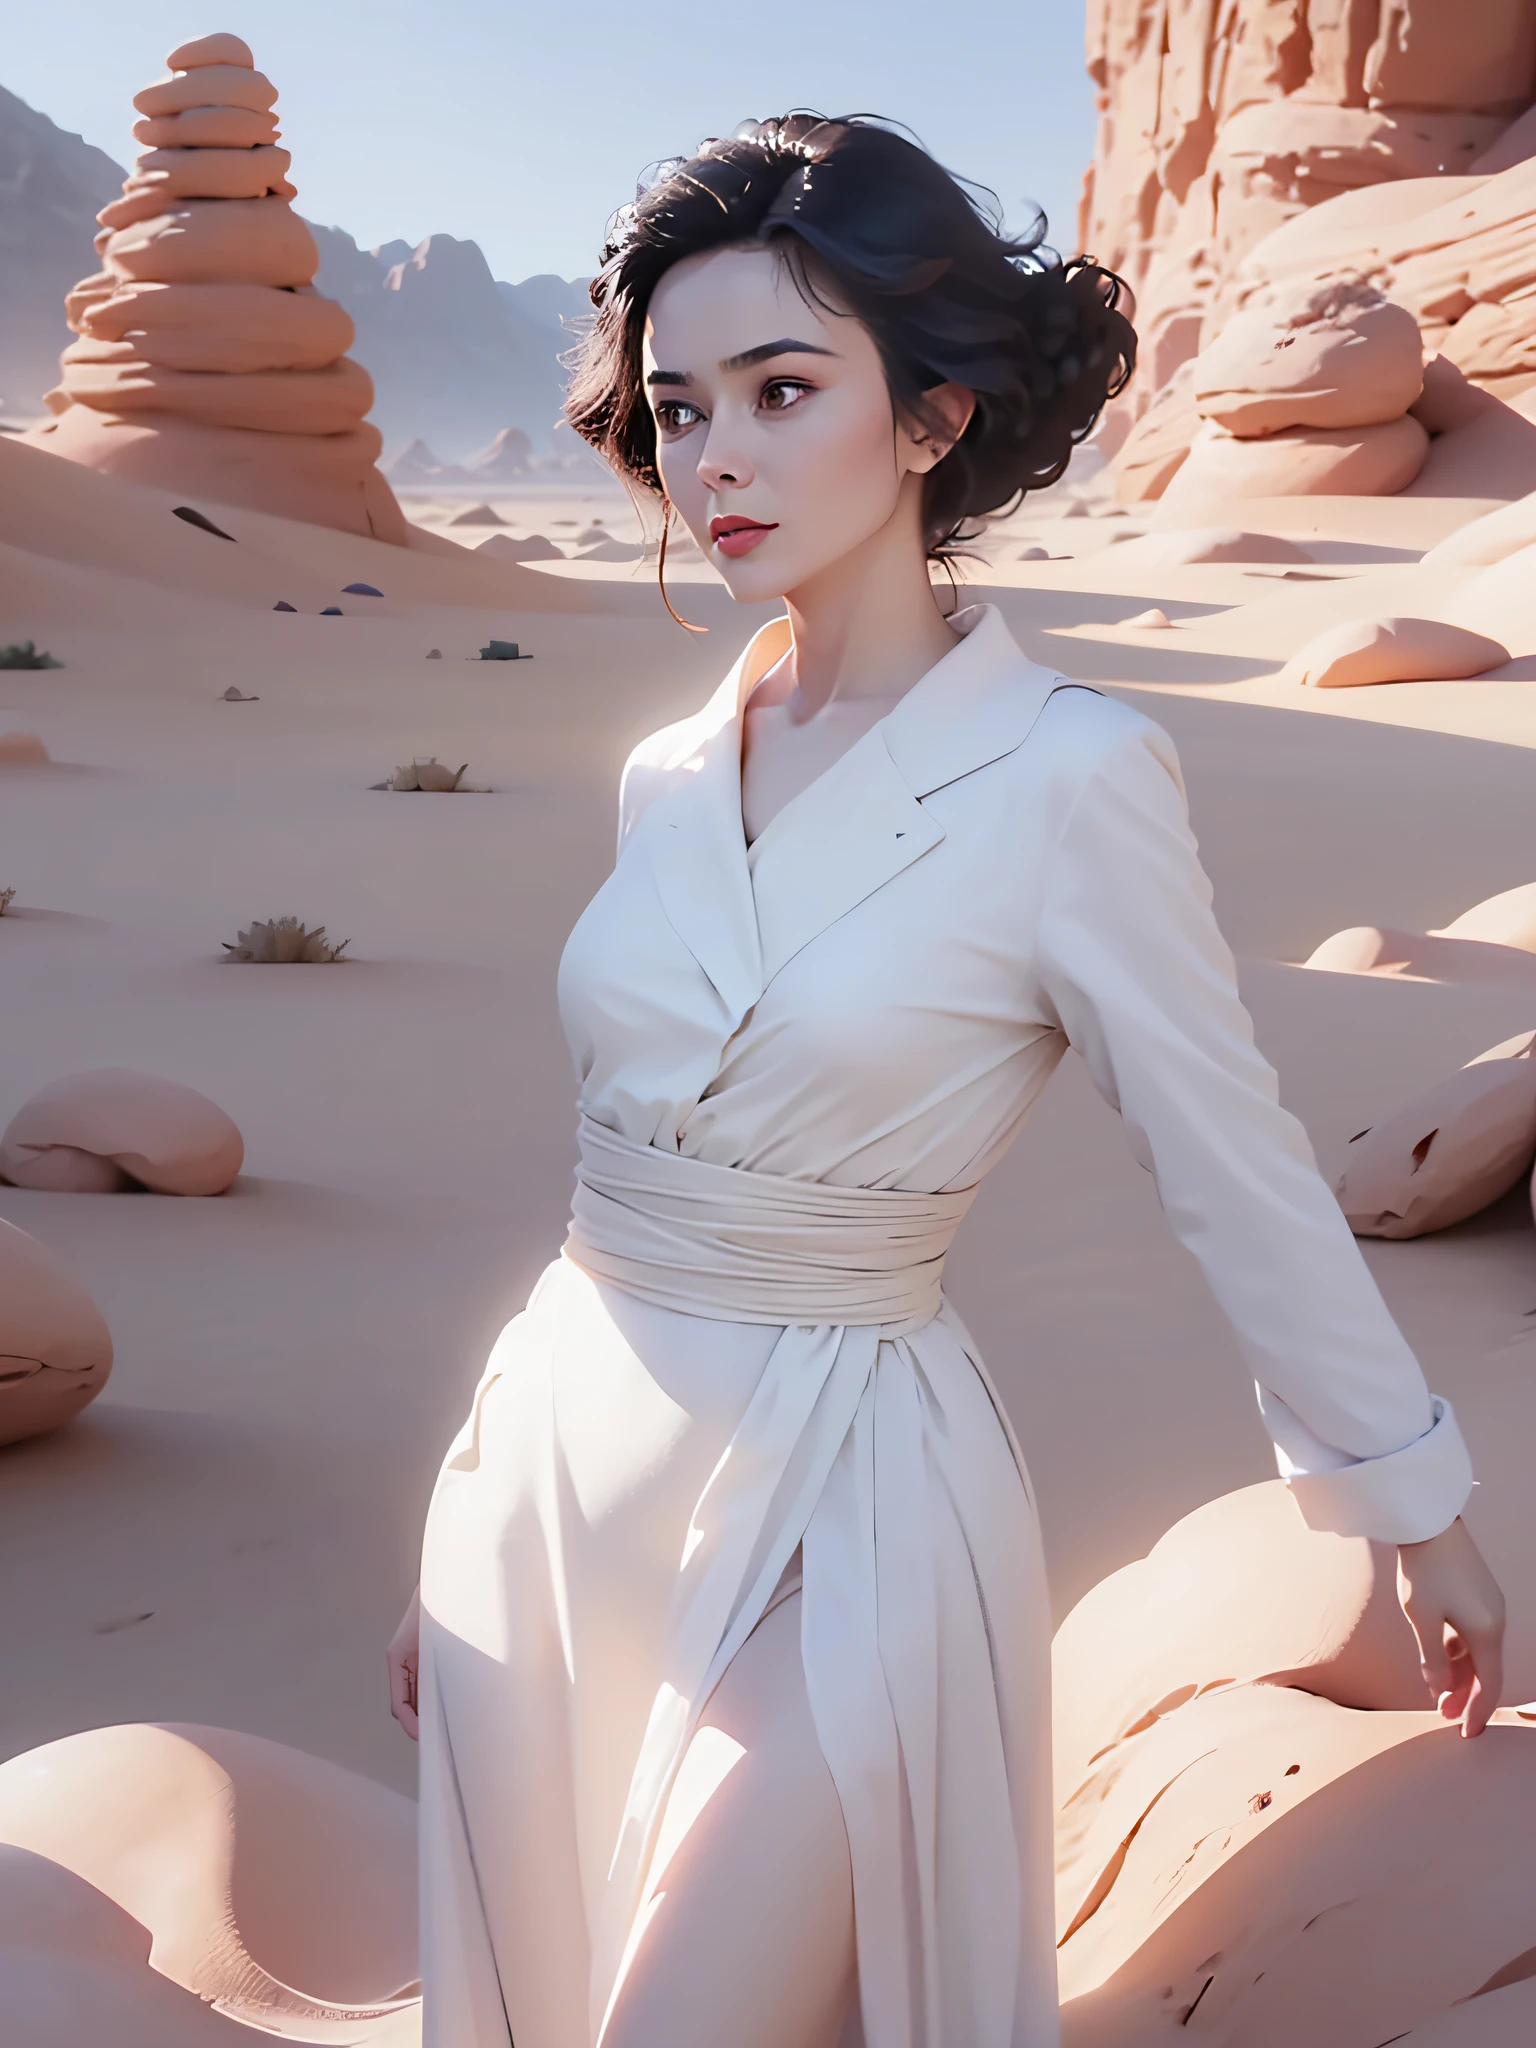 Egyptian Princess, dressed in few golden clothes, with medium black hair and black eyes, sensual and seductive look, in an oasis in the middle of the desert and camels in the background of the image, 真实感, conceptual artwork, Sur真实感, ray tracing, reflection light, cinematic lighting, 8k, high qualiy, High details, super detaill, best qualityer